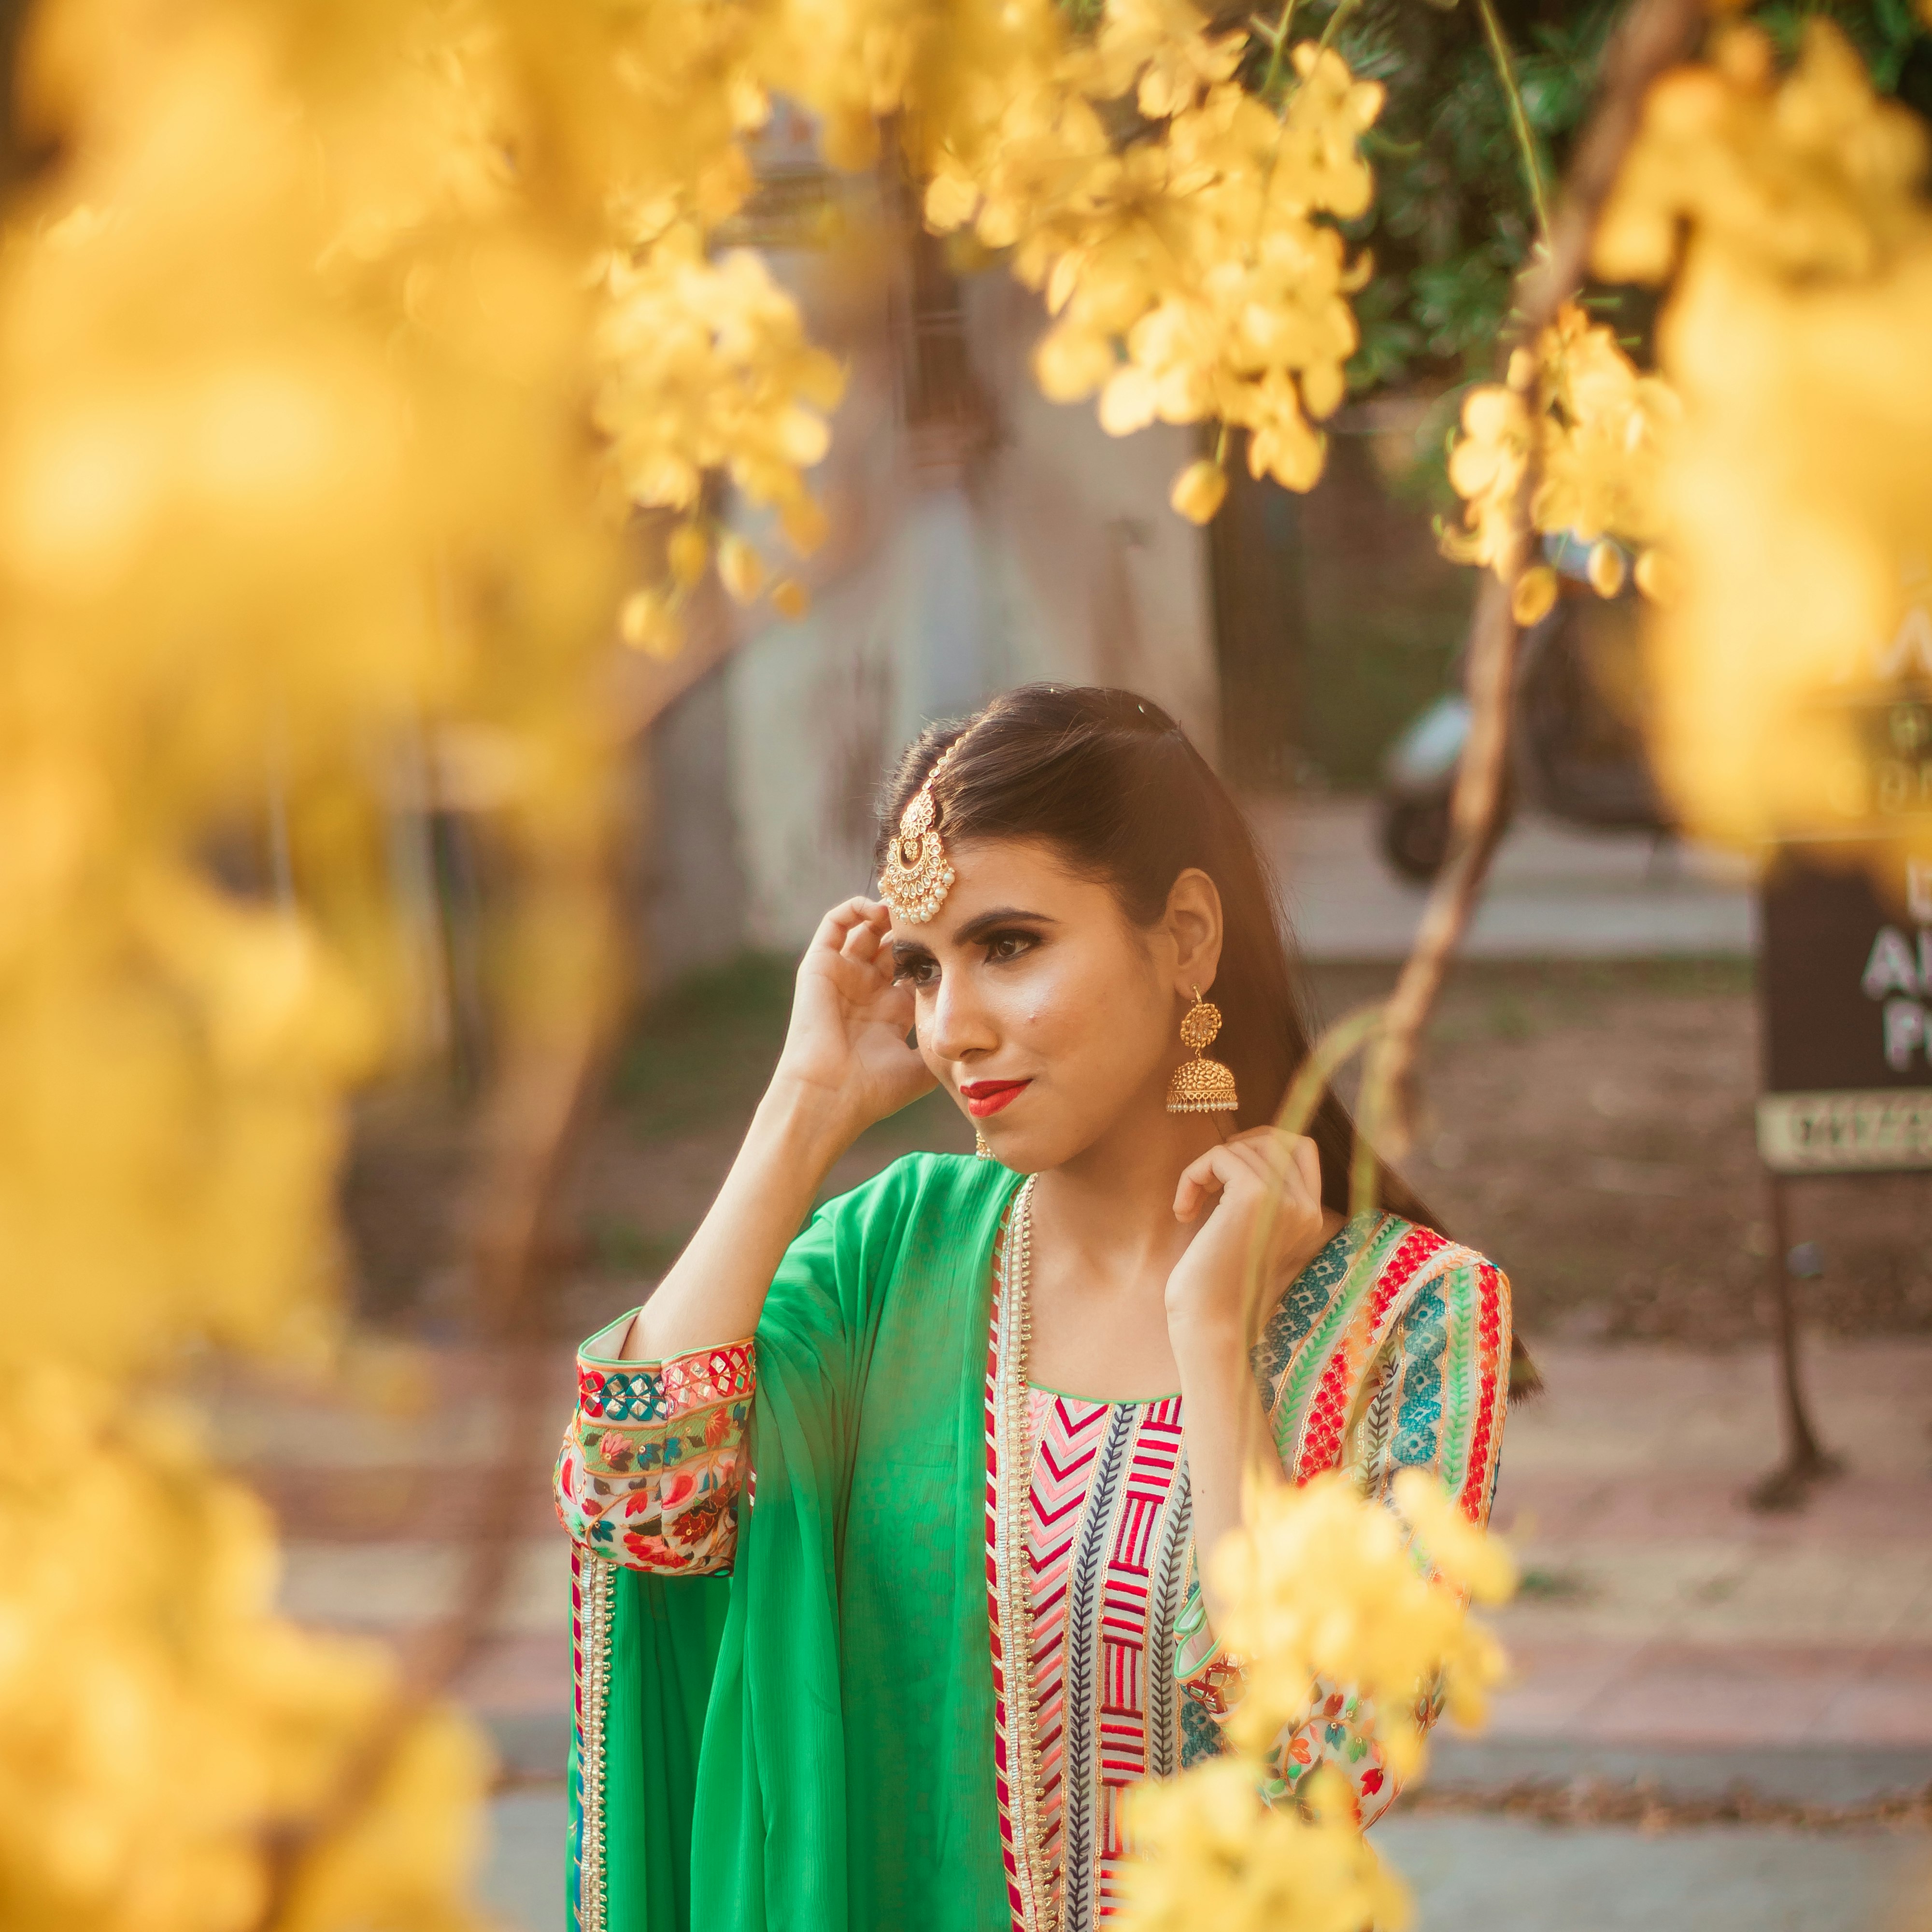 woman in red and white sari standing near yellow flowers during daytime